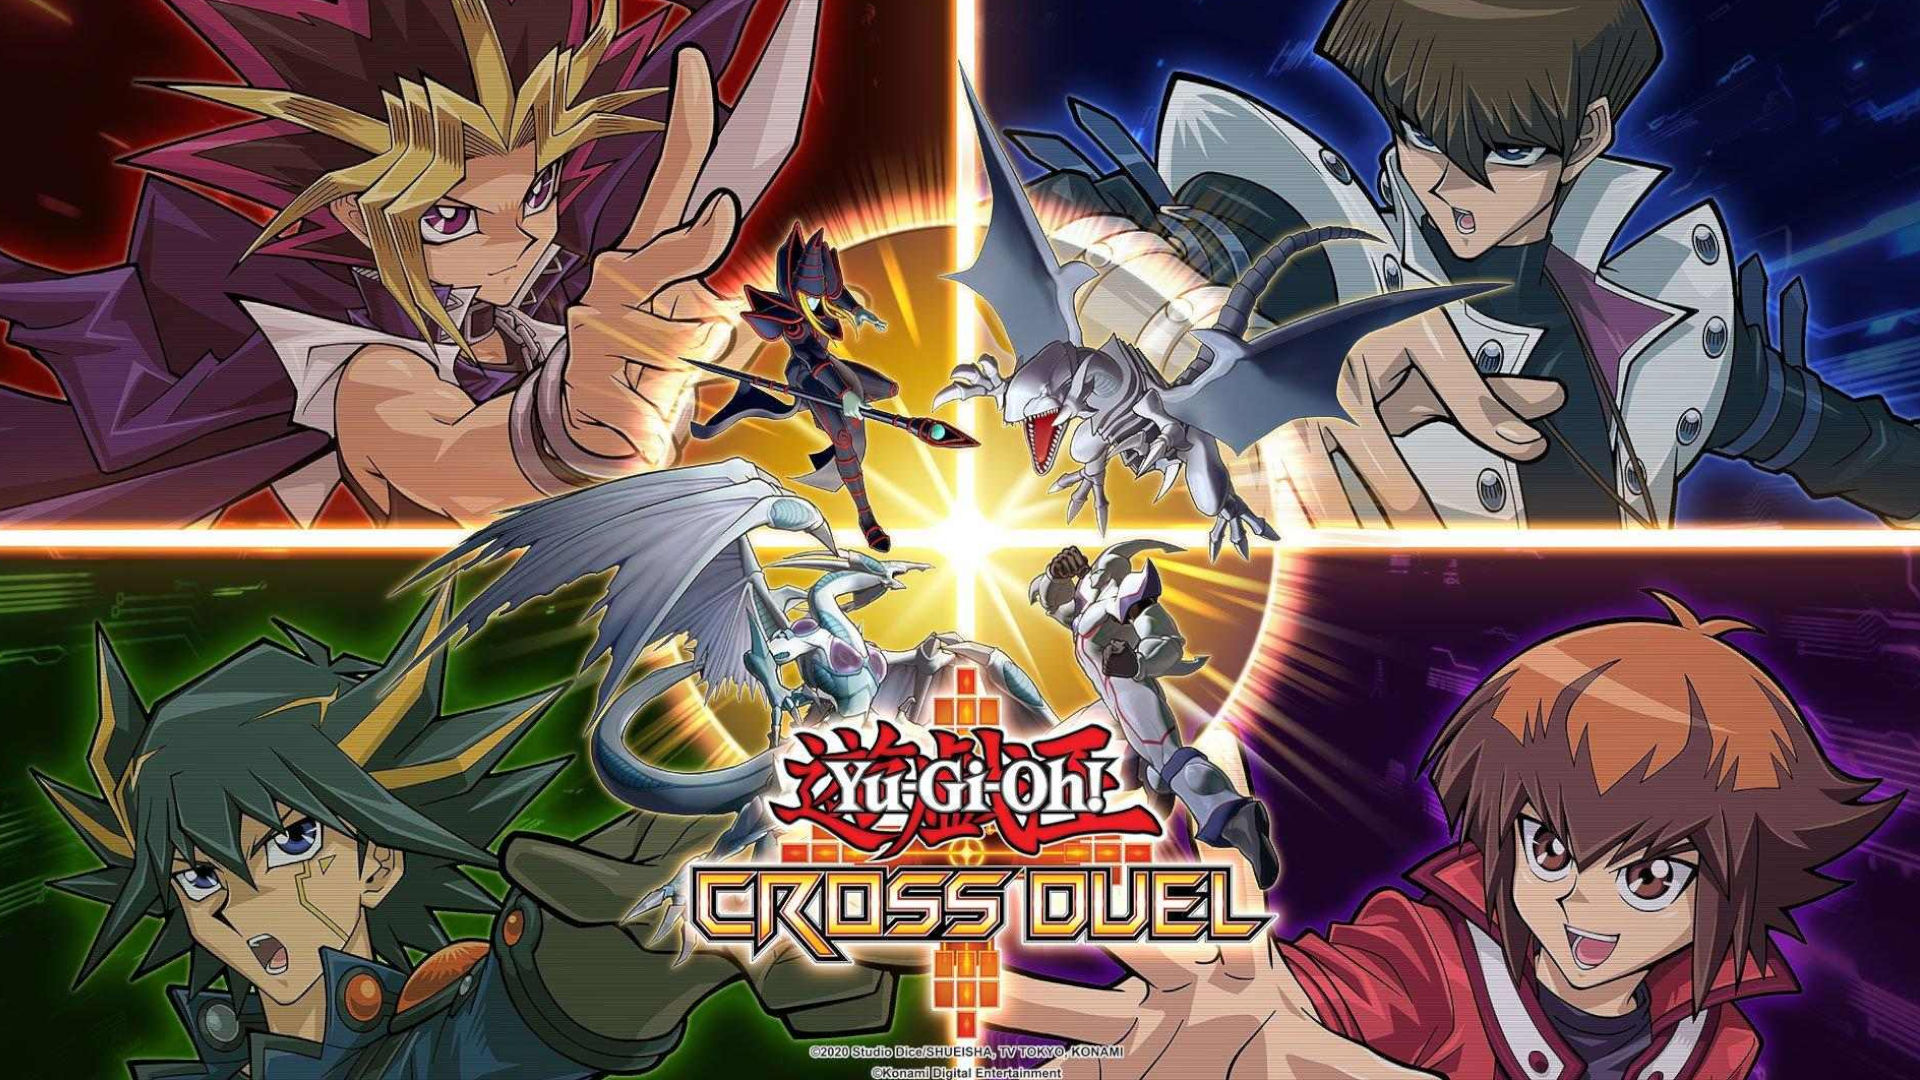 Cover for YuGiOh Cross Duel with four generations of duellists facing off against each other, including Yugi and Jaden